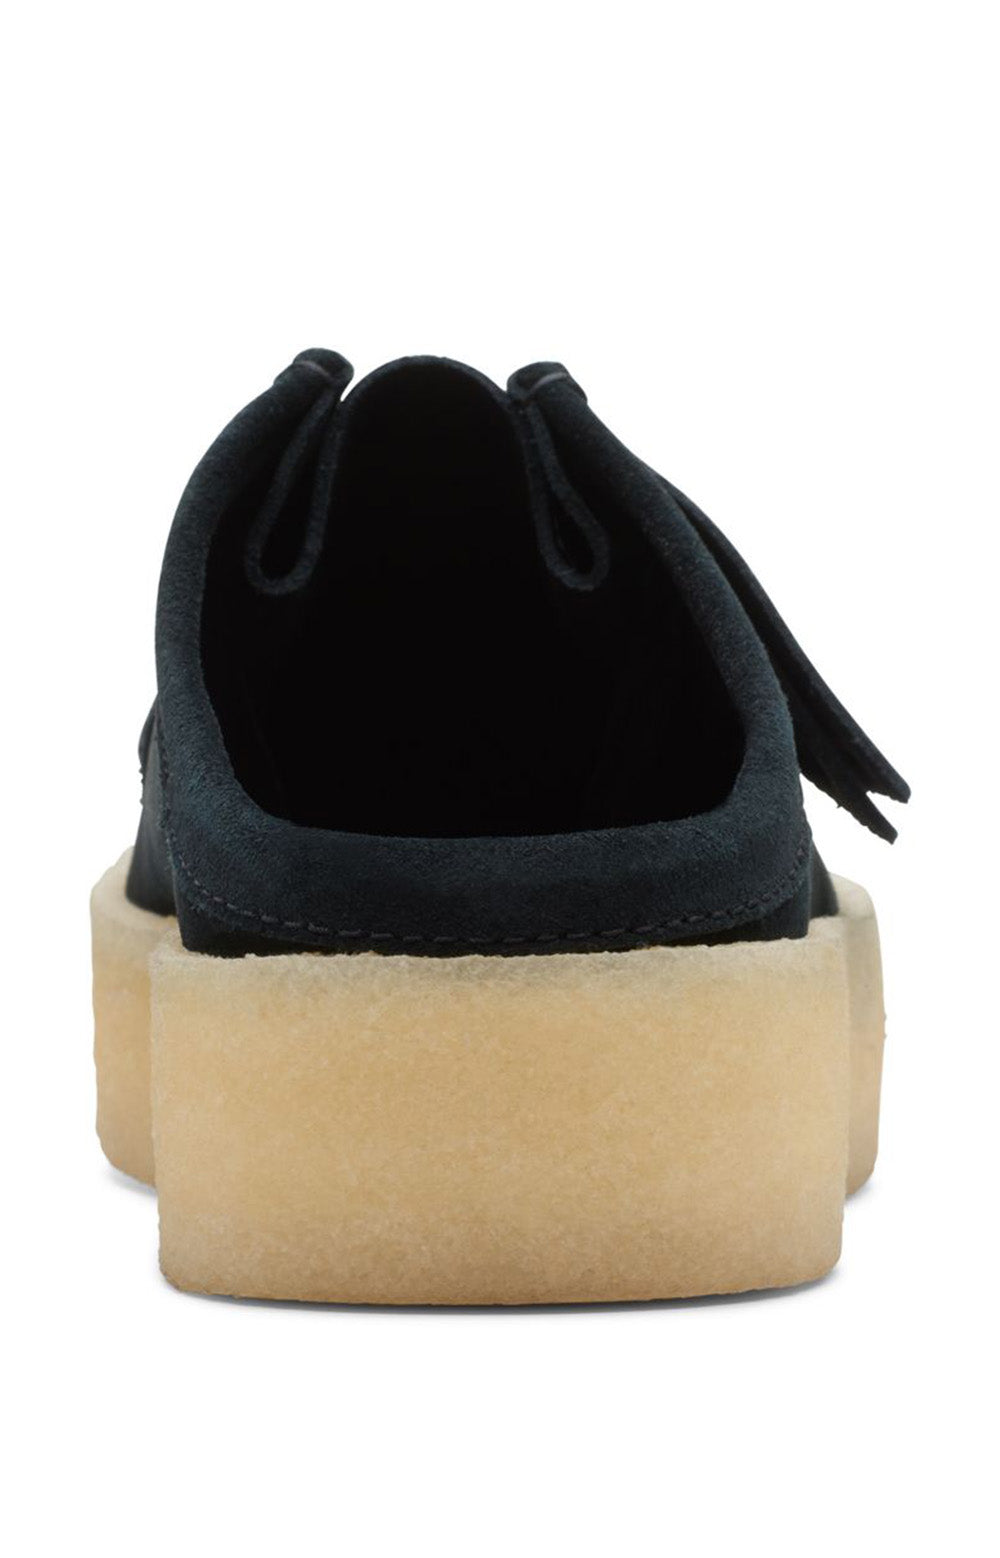 A person holding the Clarks Originals Wallabee Cup Low Men's Black Suede 26167285 shoes to showcase their supple suede and classic design